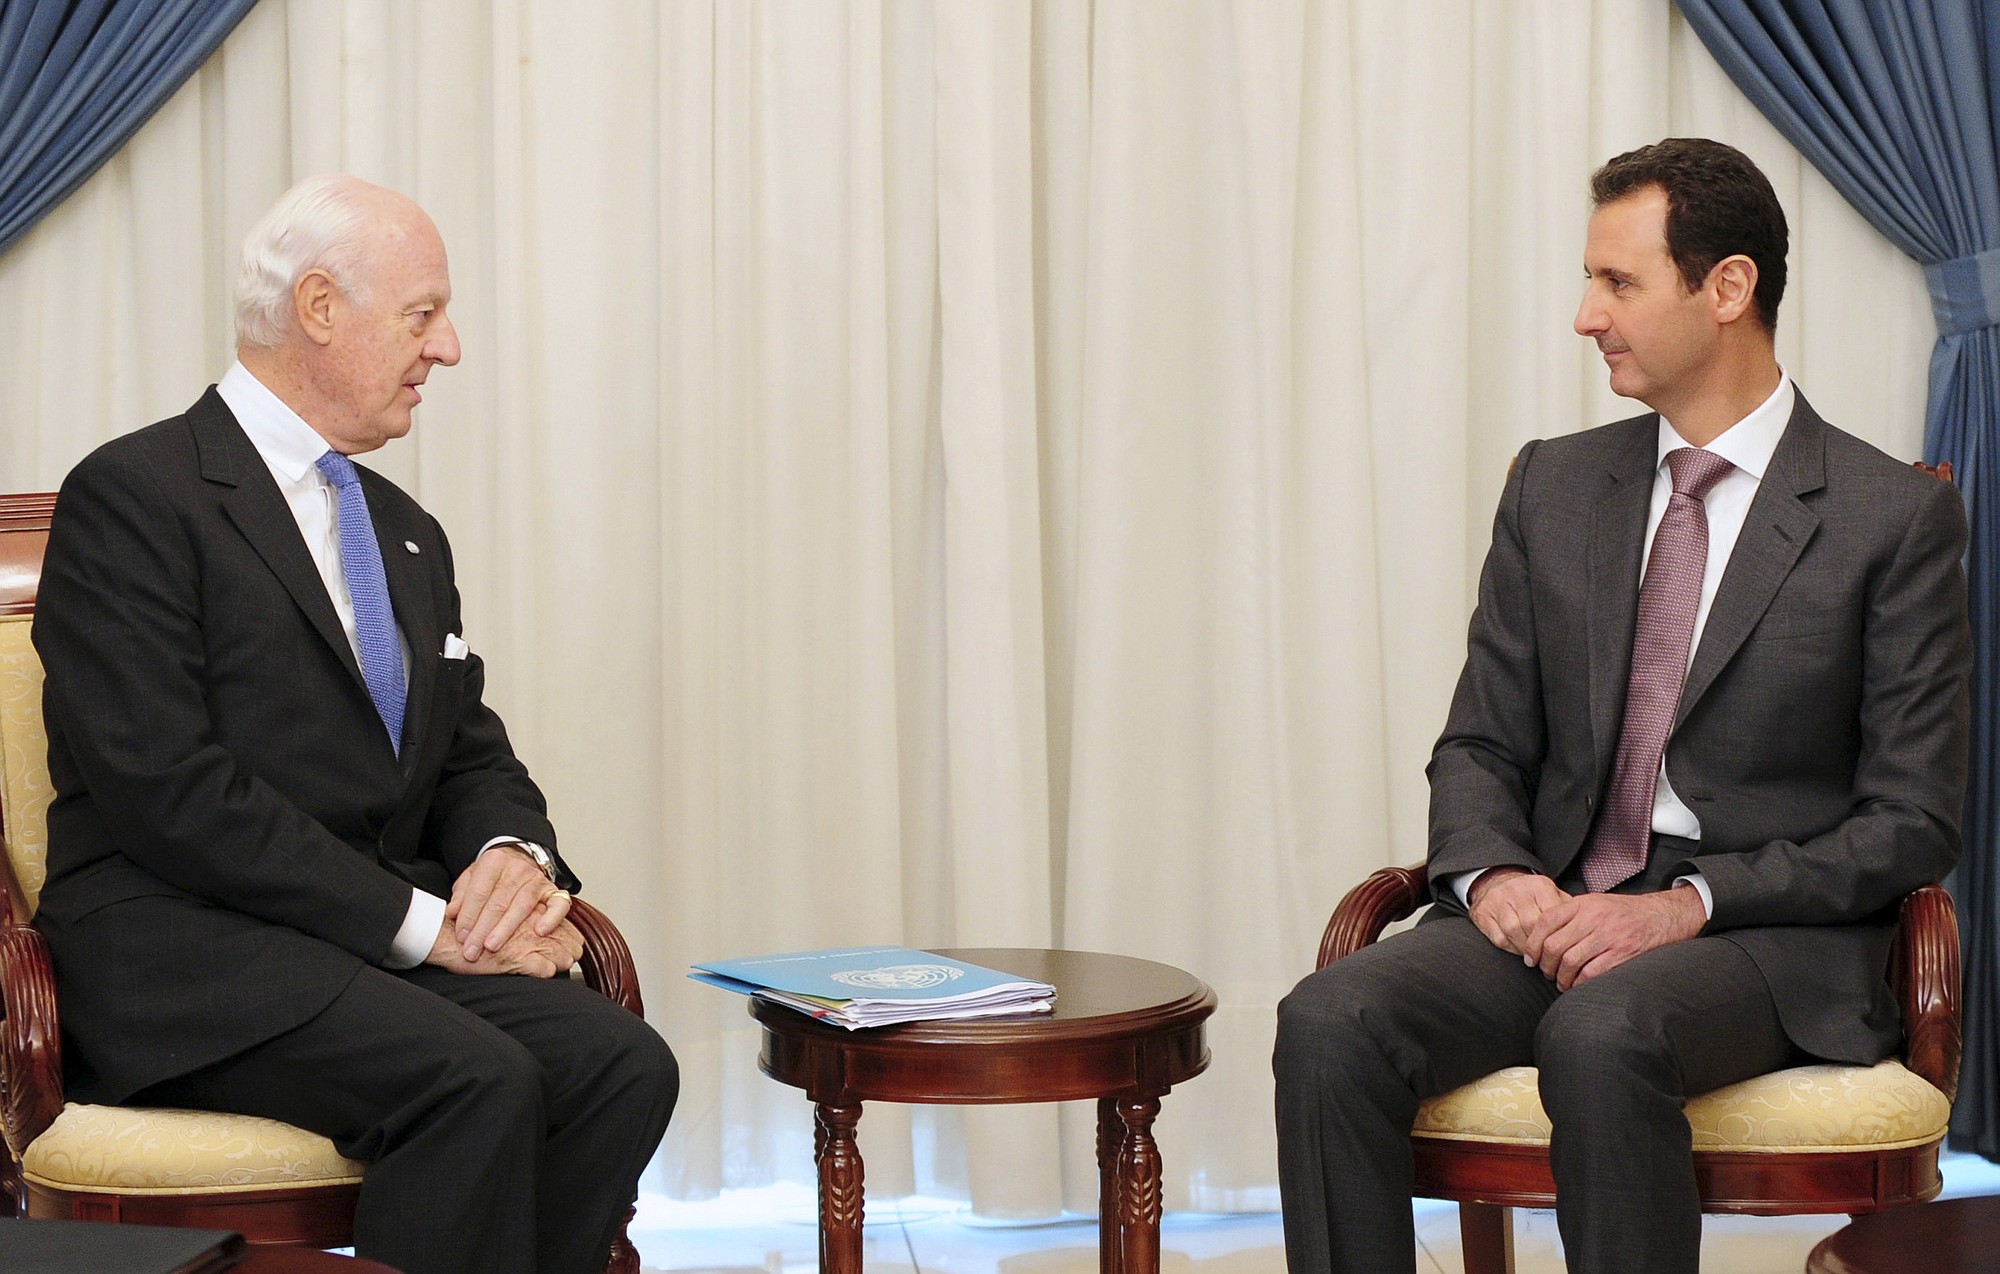 Syrian official news agency SANA
Syrian President Bashar Assad, right, speaks with Staffan de Mistura, the United Nations special envoy to Syria in Damascus, Syria, on Monday.